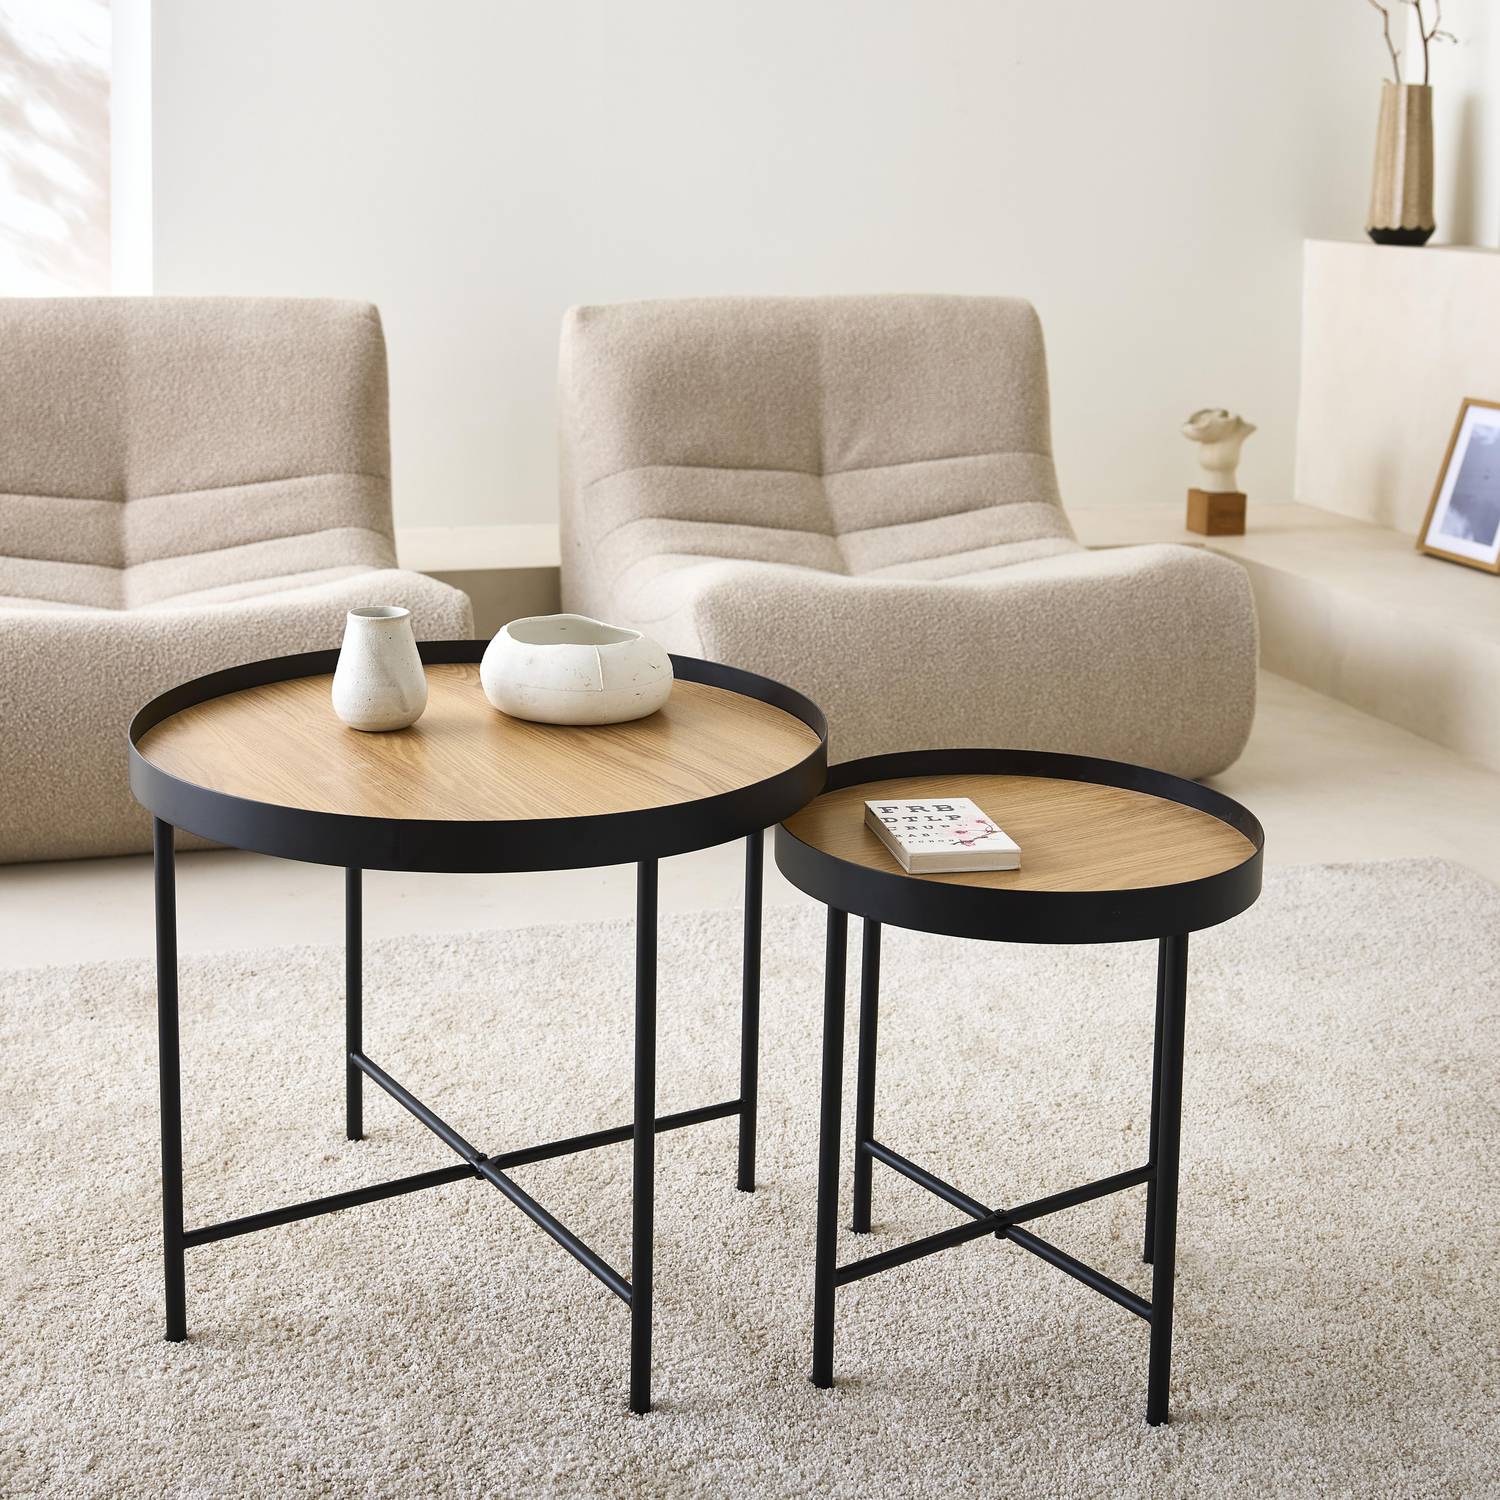 Set of 2 practical round nesting tables in oak-effect MDF with black legs Photo1